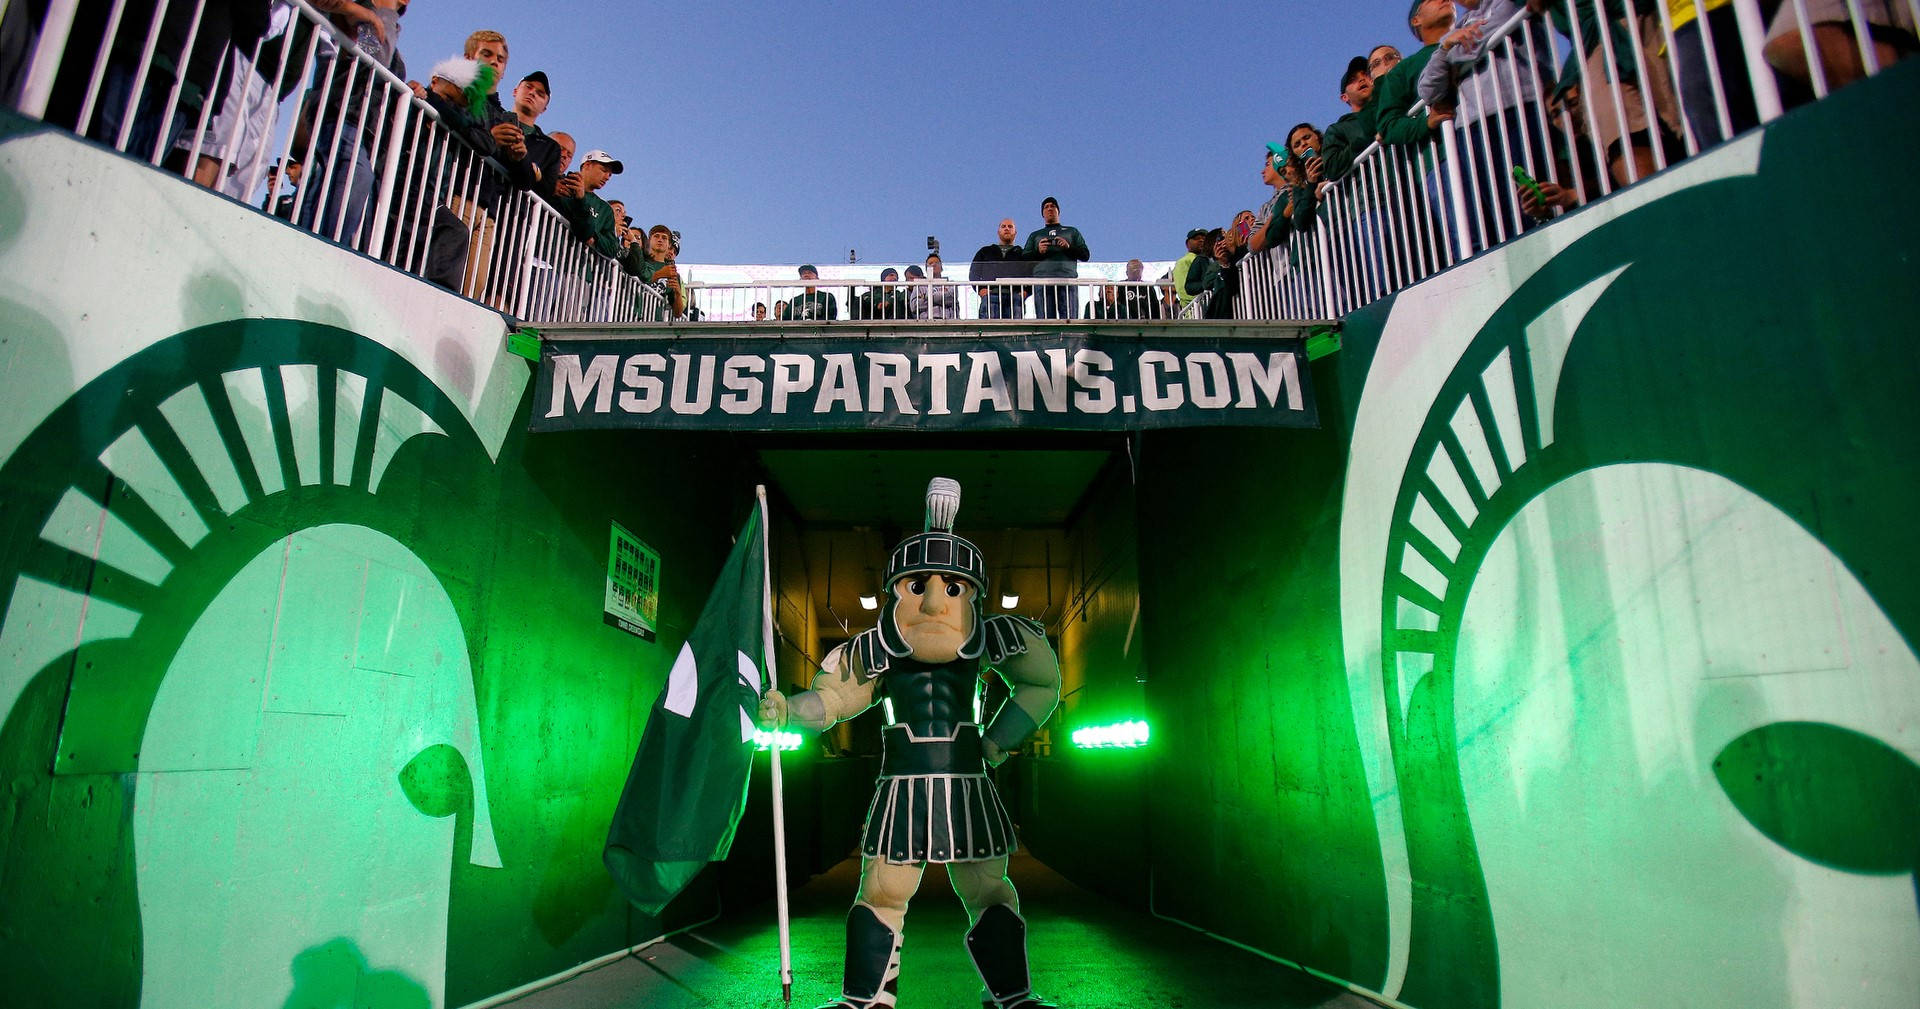 Michigan State University's Spartan Mascot In Action Background